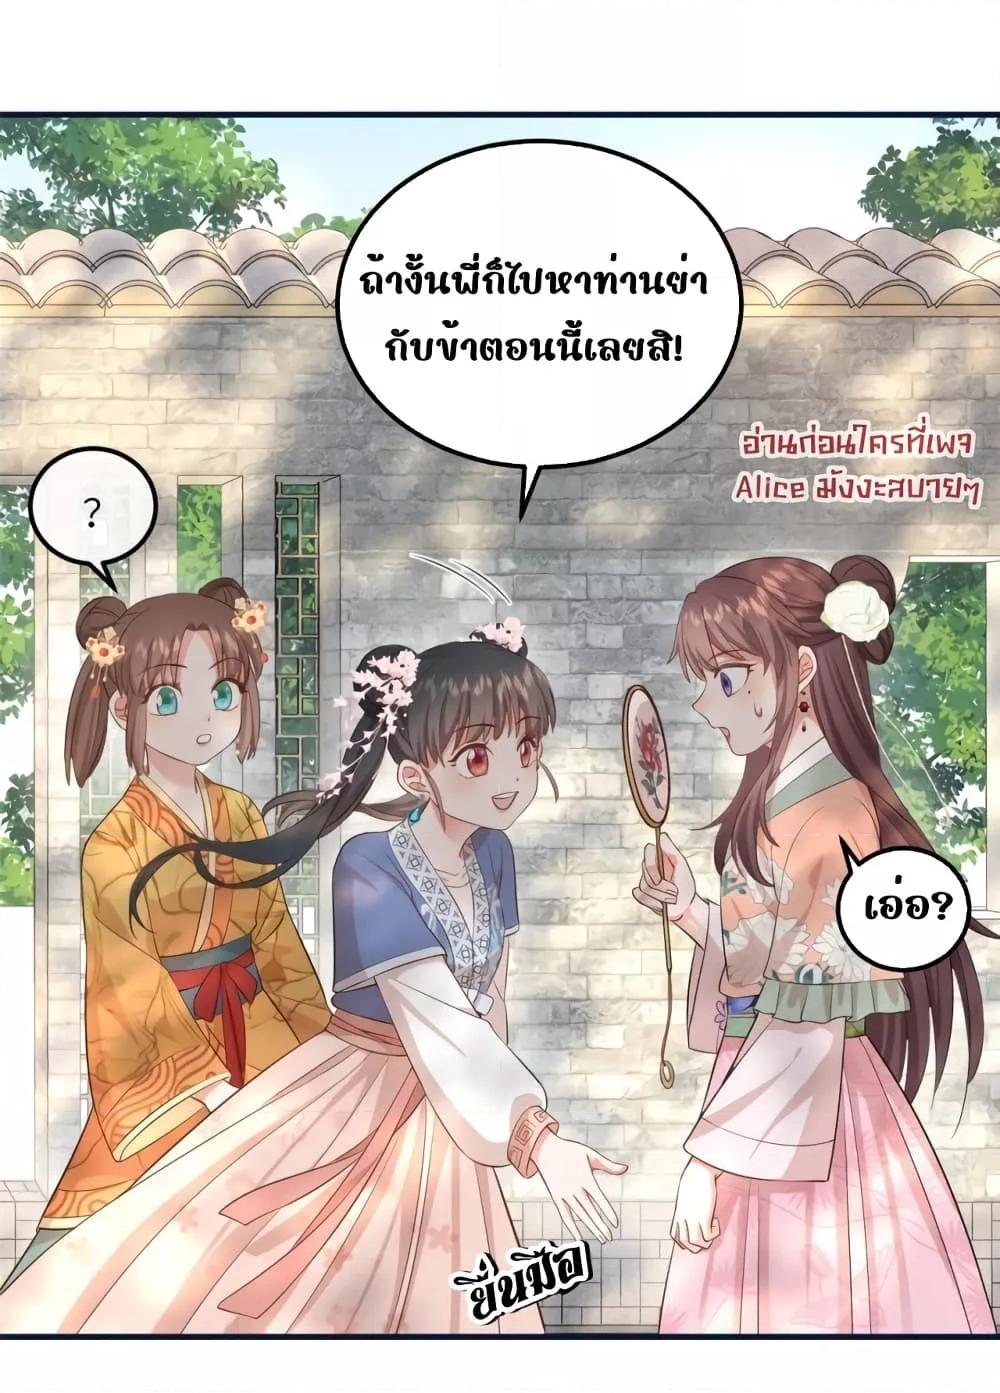 After I Was Reborn, I Became the Petite in the ตอนที่ 8 (5)